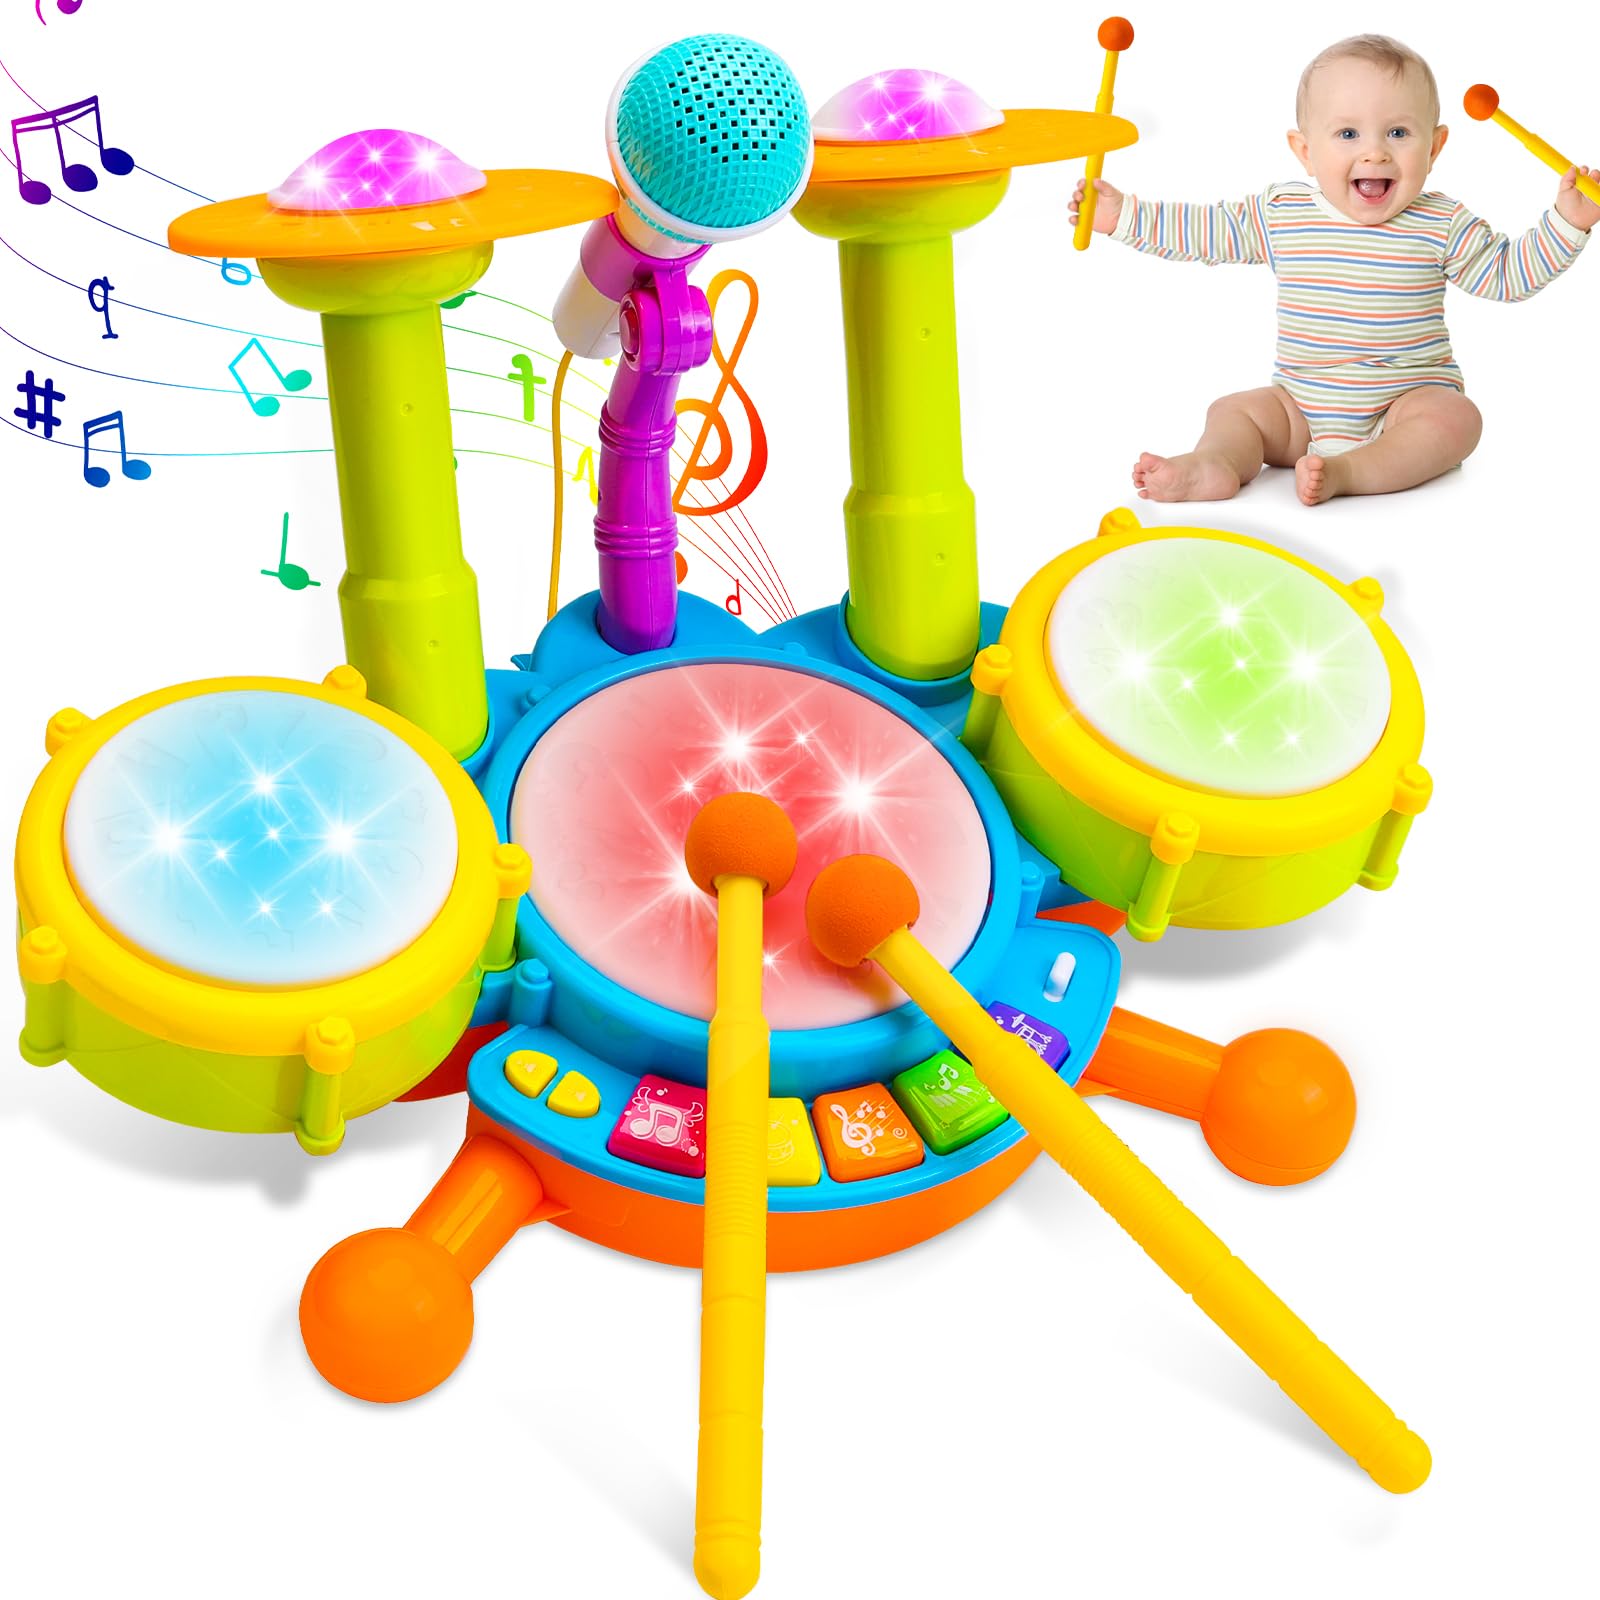 Kids Drum Set for Toddlers 1-3 Musical Baby Toys for 1 Year Old Boy Gifts Montessori Baby Girl Toys with Microphone Light Up Learning Toys Birthday Gifts for Infants 6 9 12 18 Months Toddler Age 1-2